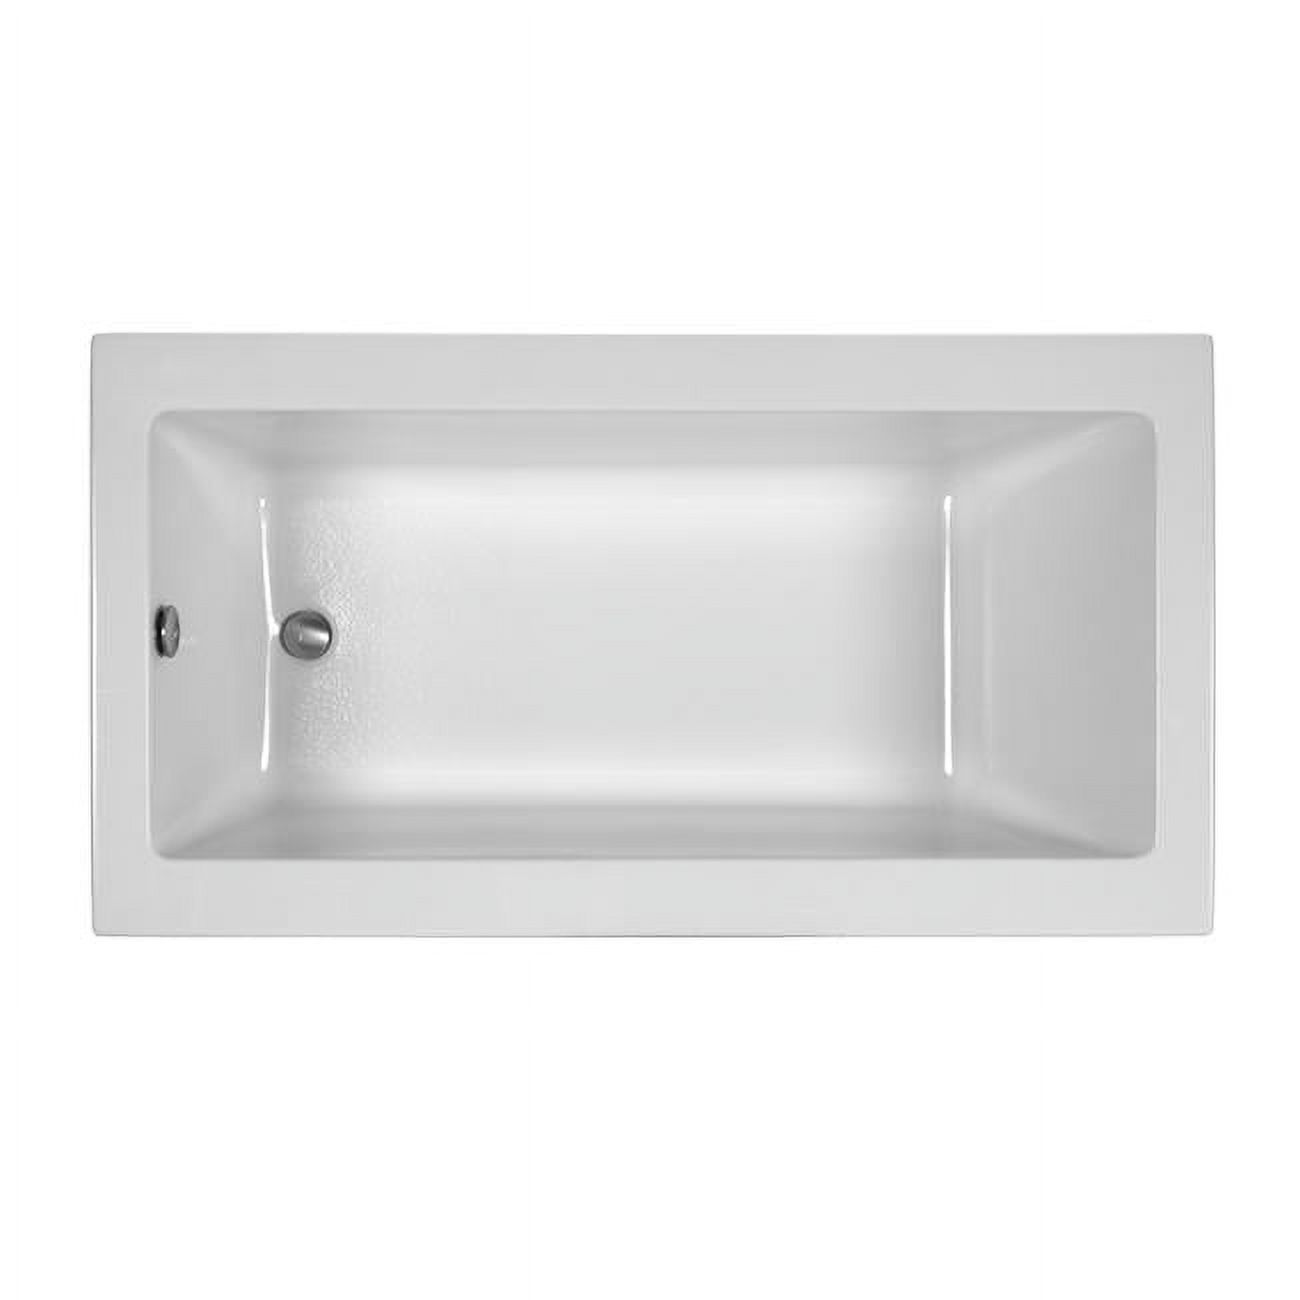 60 x 32 in. Shower Base with Drain, White - Left Hand - image 1 of 1